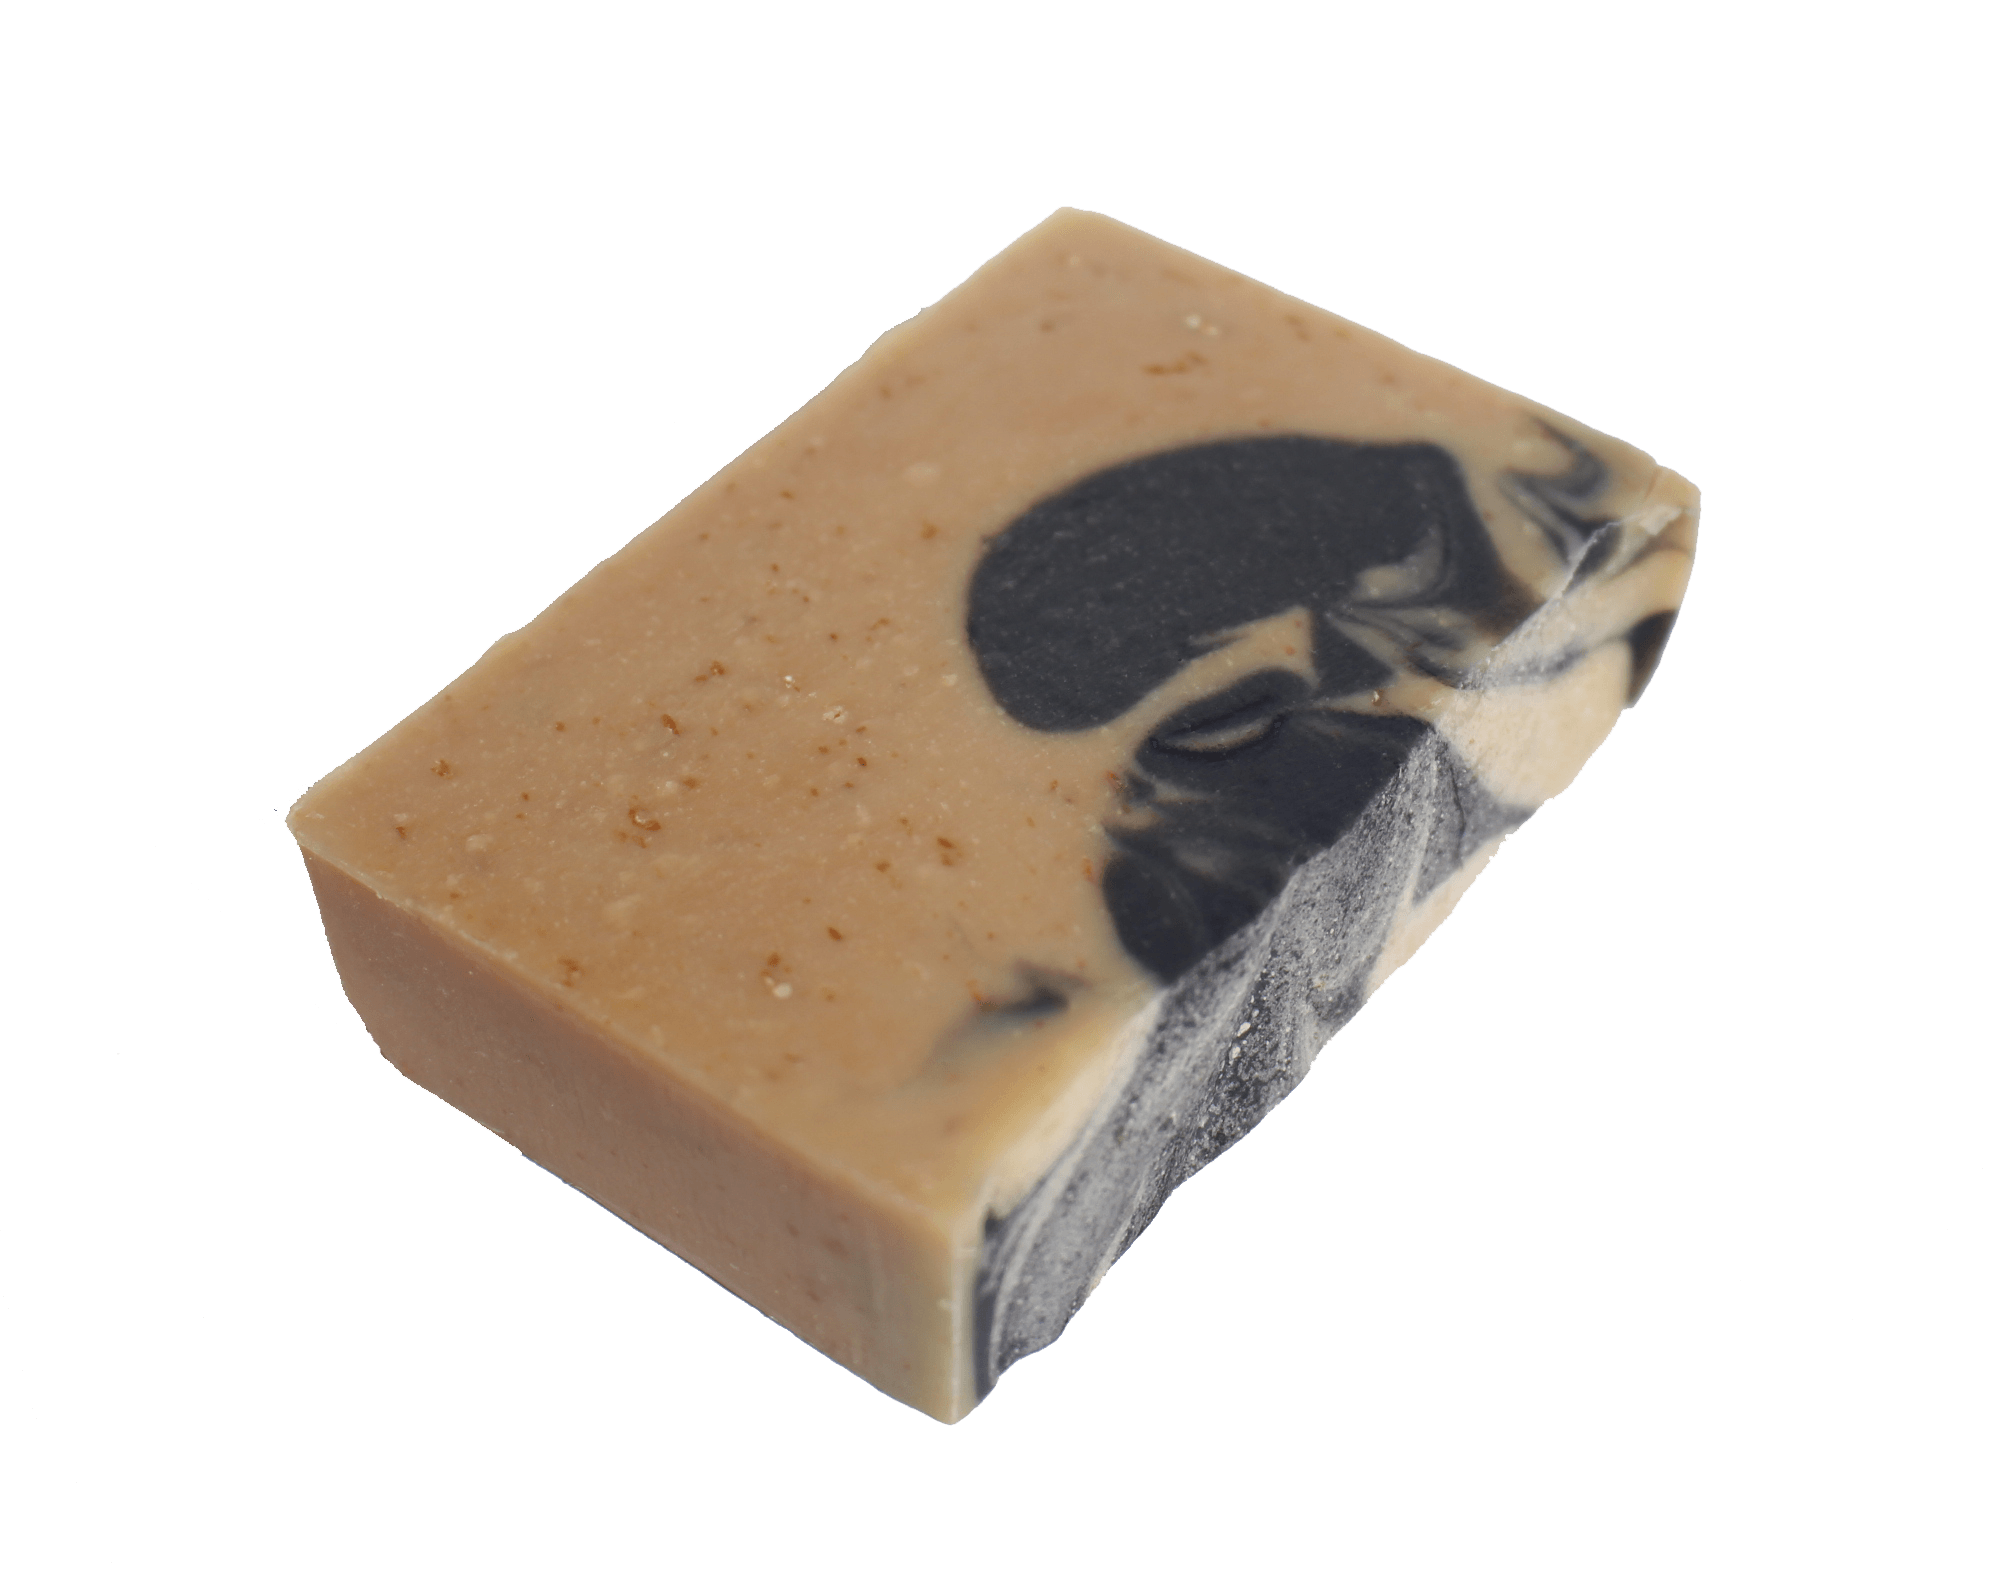 Soap PNG images Download 